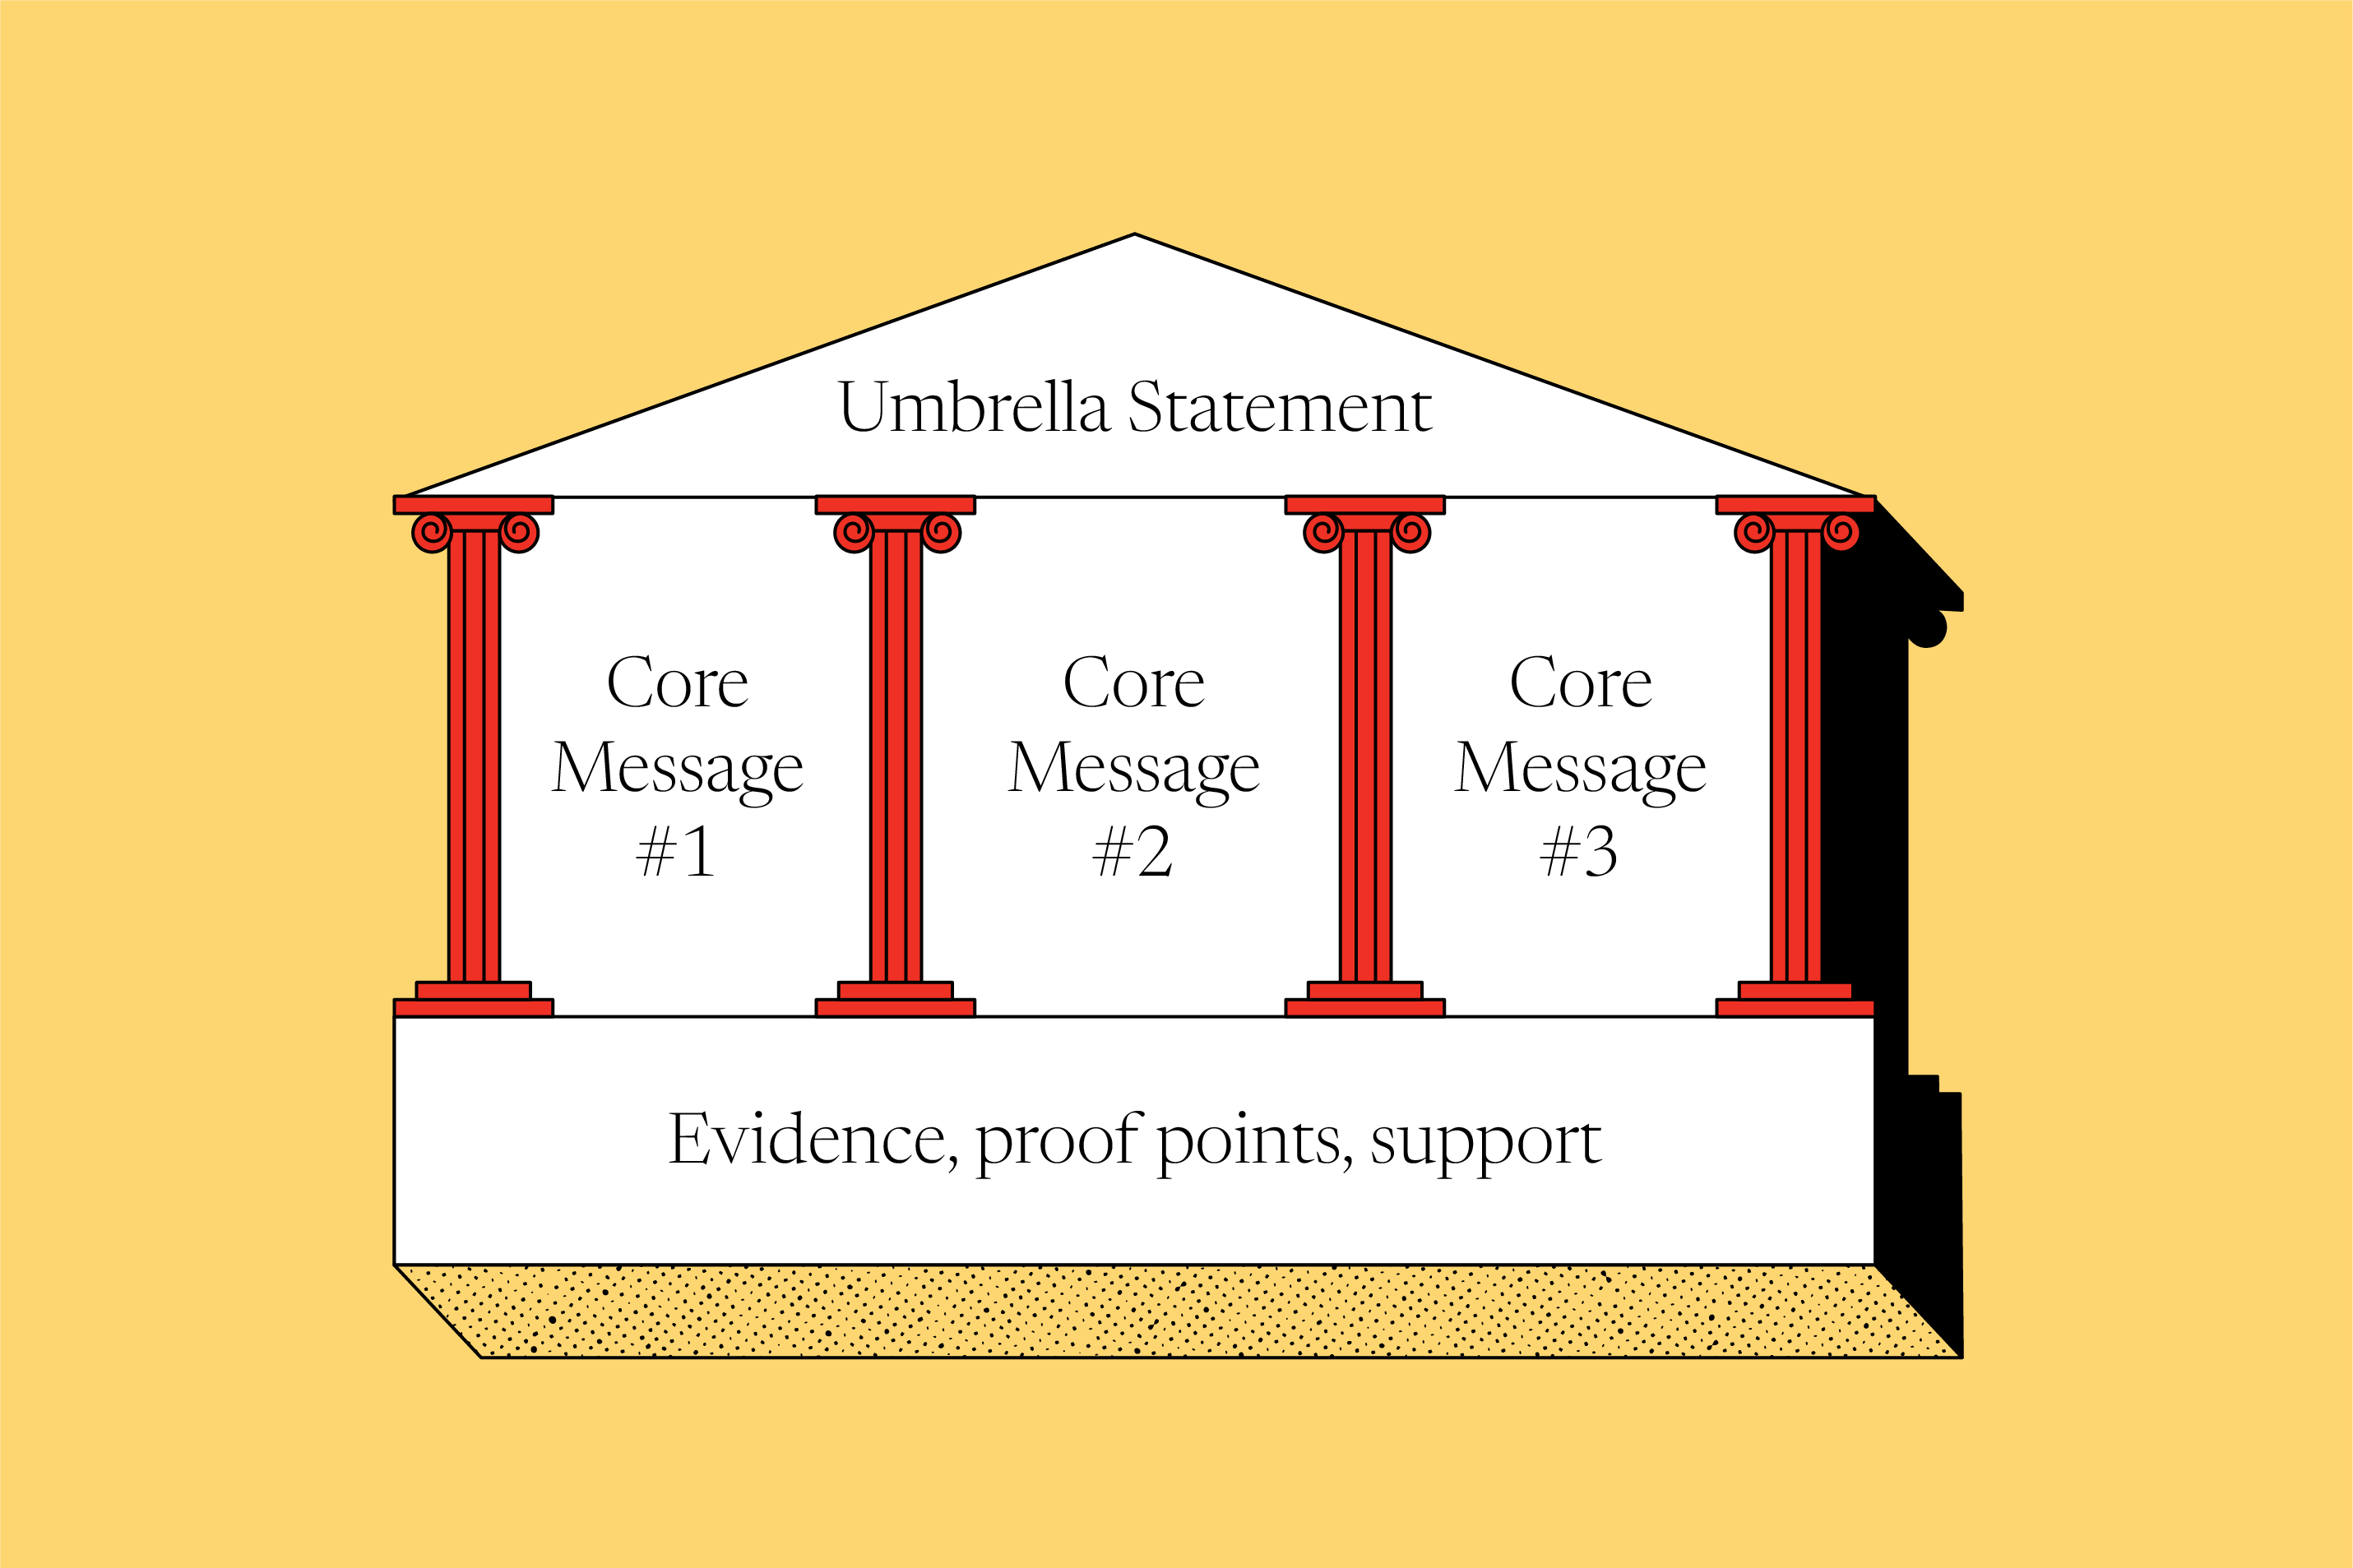 Umbrella Statement. Core Message #1. Core Message #2. Core Message #3. Evidence, proof points, support